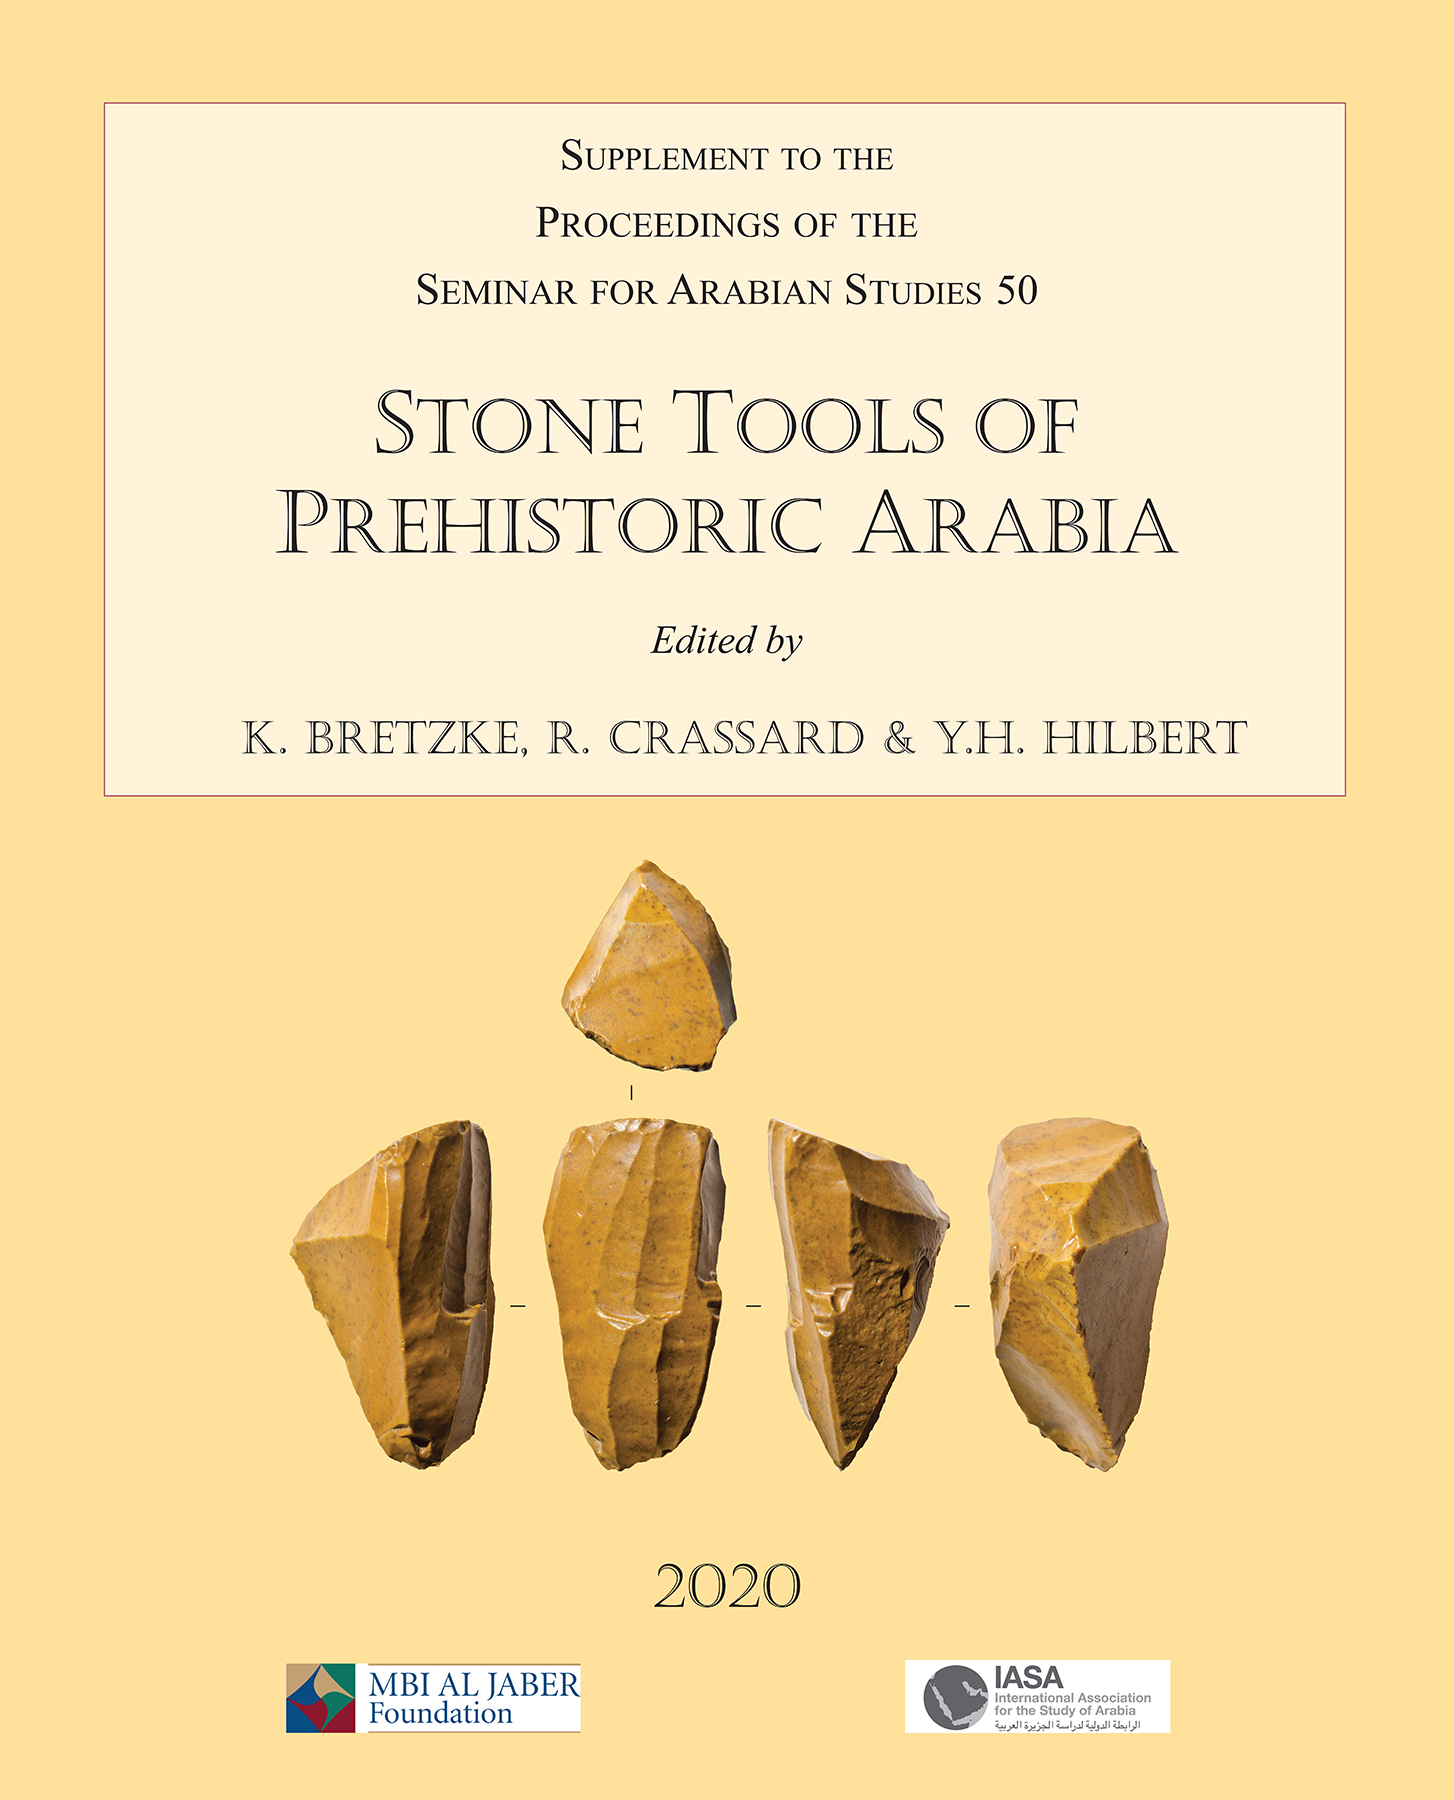 					View Vol. 50 (2020): Stone Tools of Prehistoric Arabia: Papers from the Special Session of the Seminar for Arabian Studies held on 21 July 2019 (Vol. 50 supplement)
				